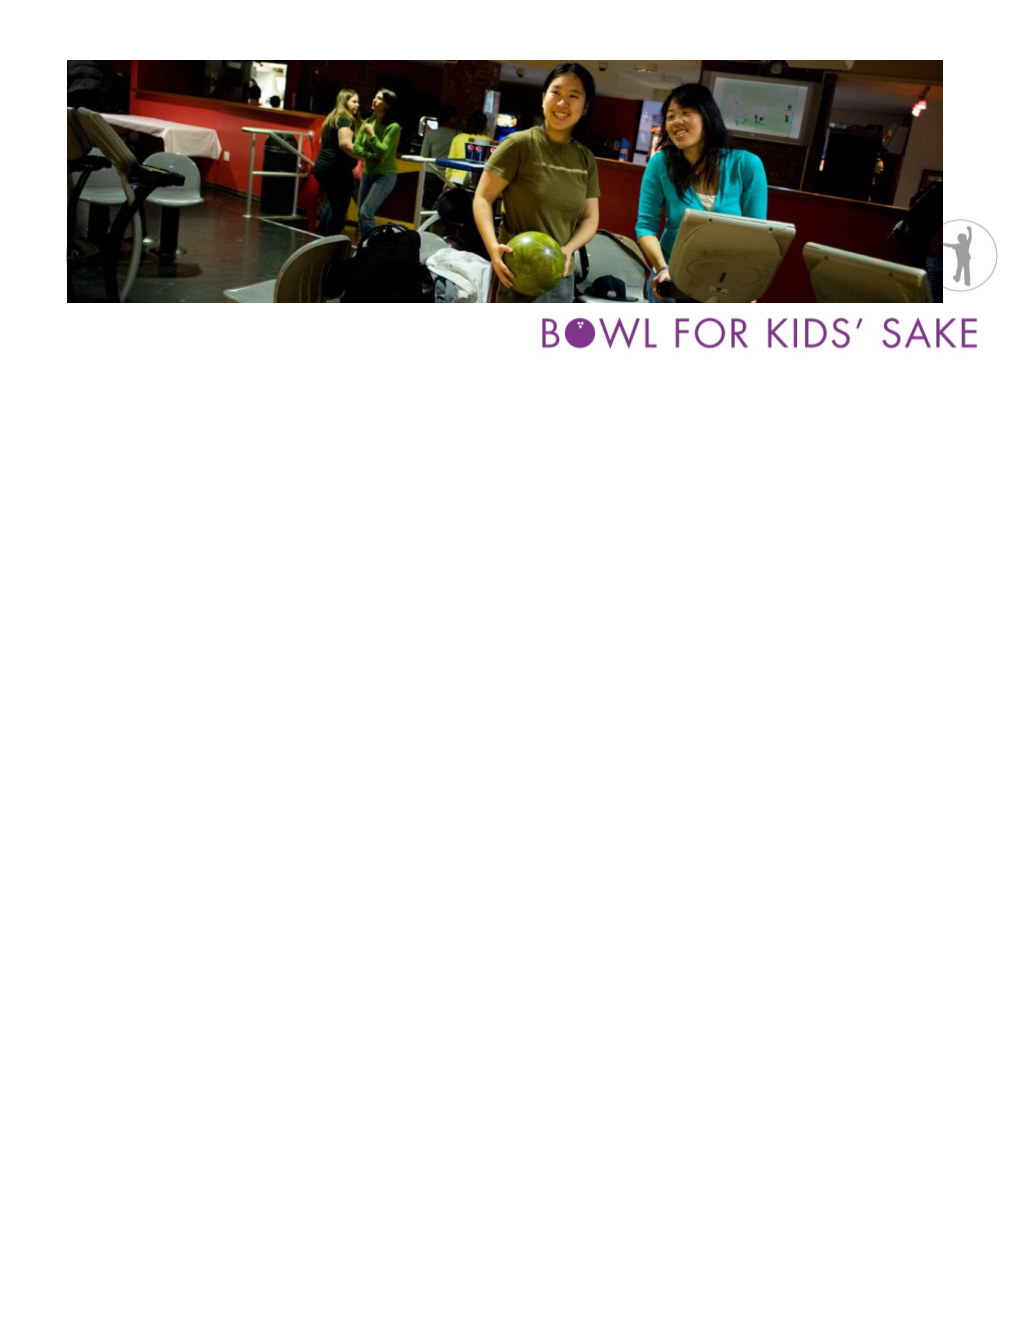 Note That Your Event Must Be Built Using the BFKS 2014 Template!